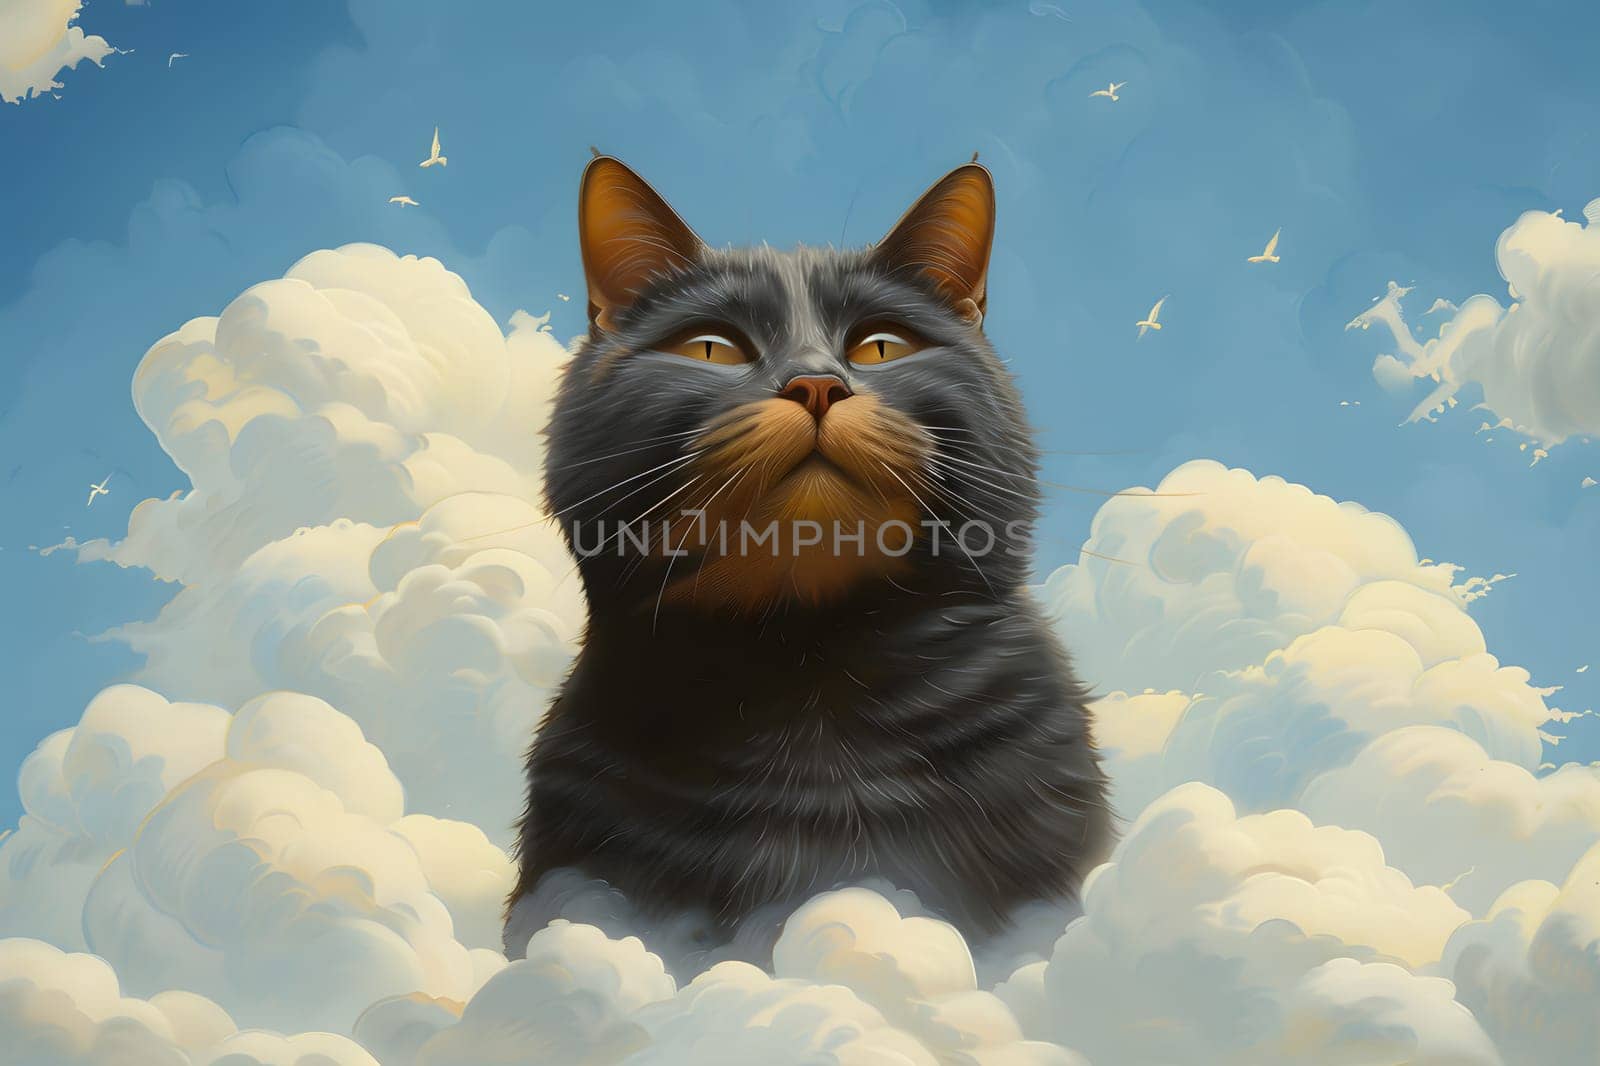 a cat is sitting in the clouds looking up at the sky by Nadtochiy